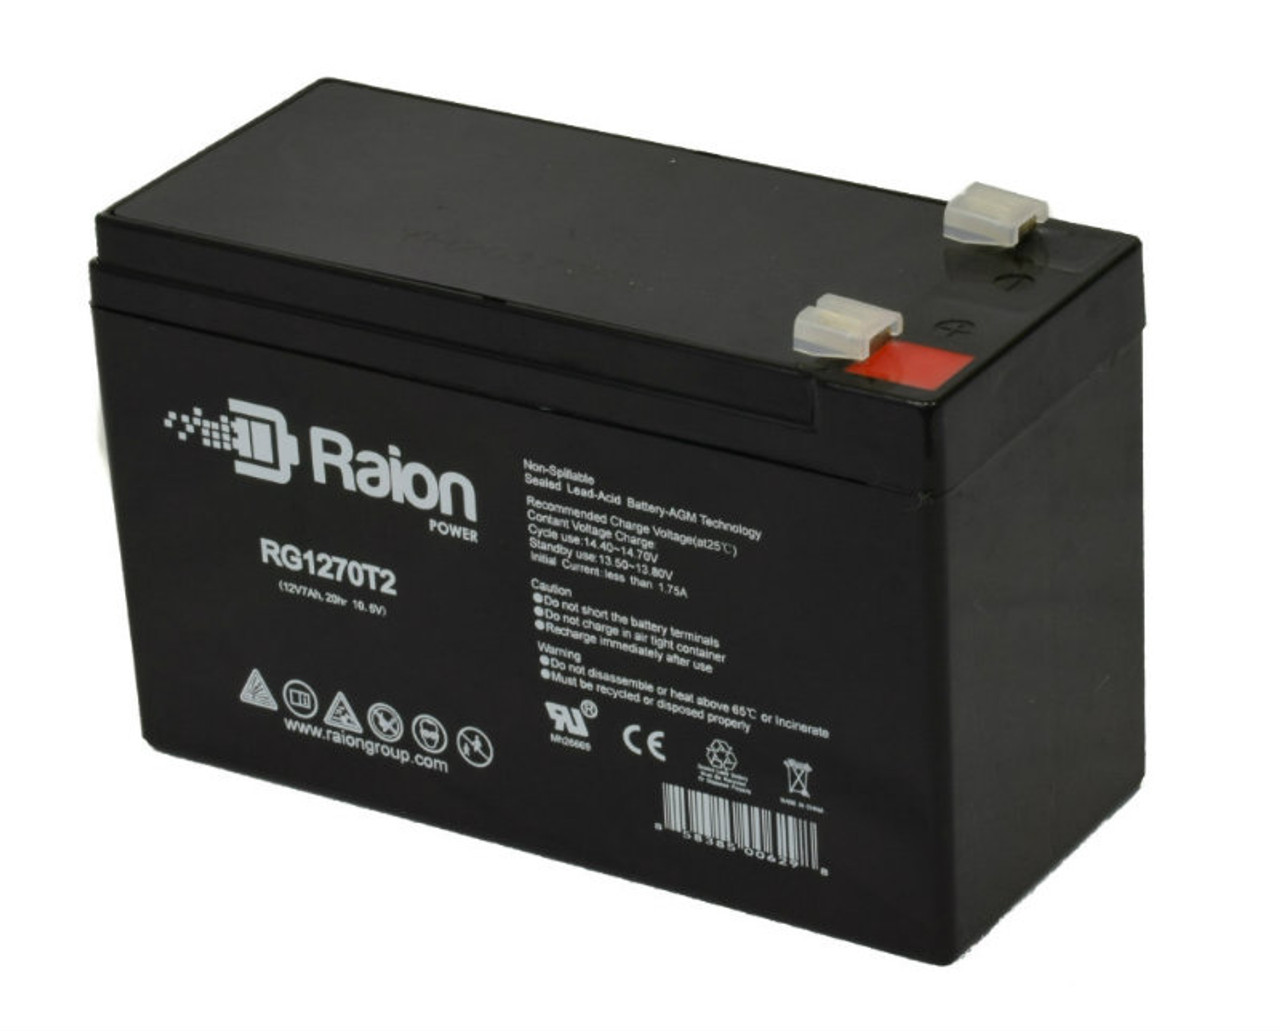 Raion Power RG1270T2 12V 7Ah Rechargeable Battery for SEC 12-MP-7.0